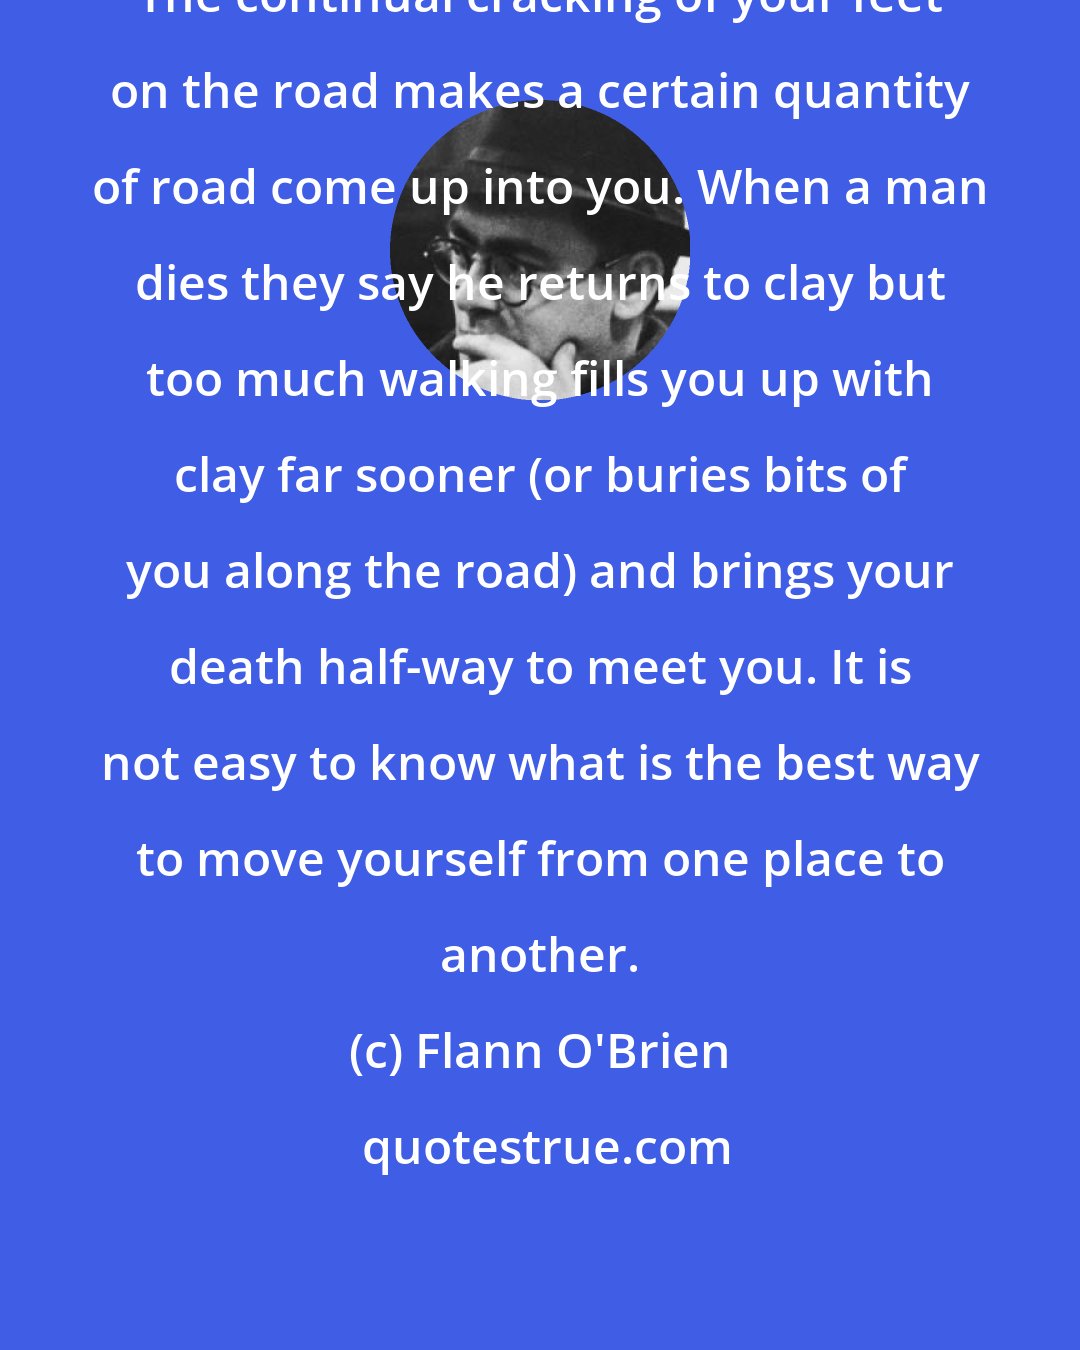 Flann O'Brien: The continual cracking of your feet on the road makes a certain quantity of road come up into you. When a man dies they say he returns to clay but too much walking fills you up with clay far sooner (or buries bits of you along the road) and brings your death half-way to meet you. It is not easy to know what is the best way to move yourself from one place to another.